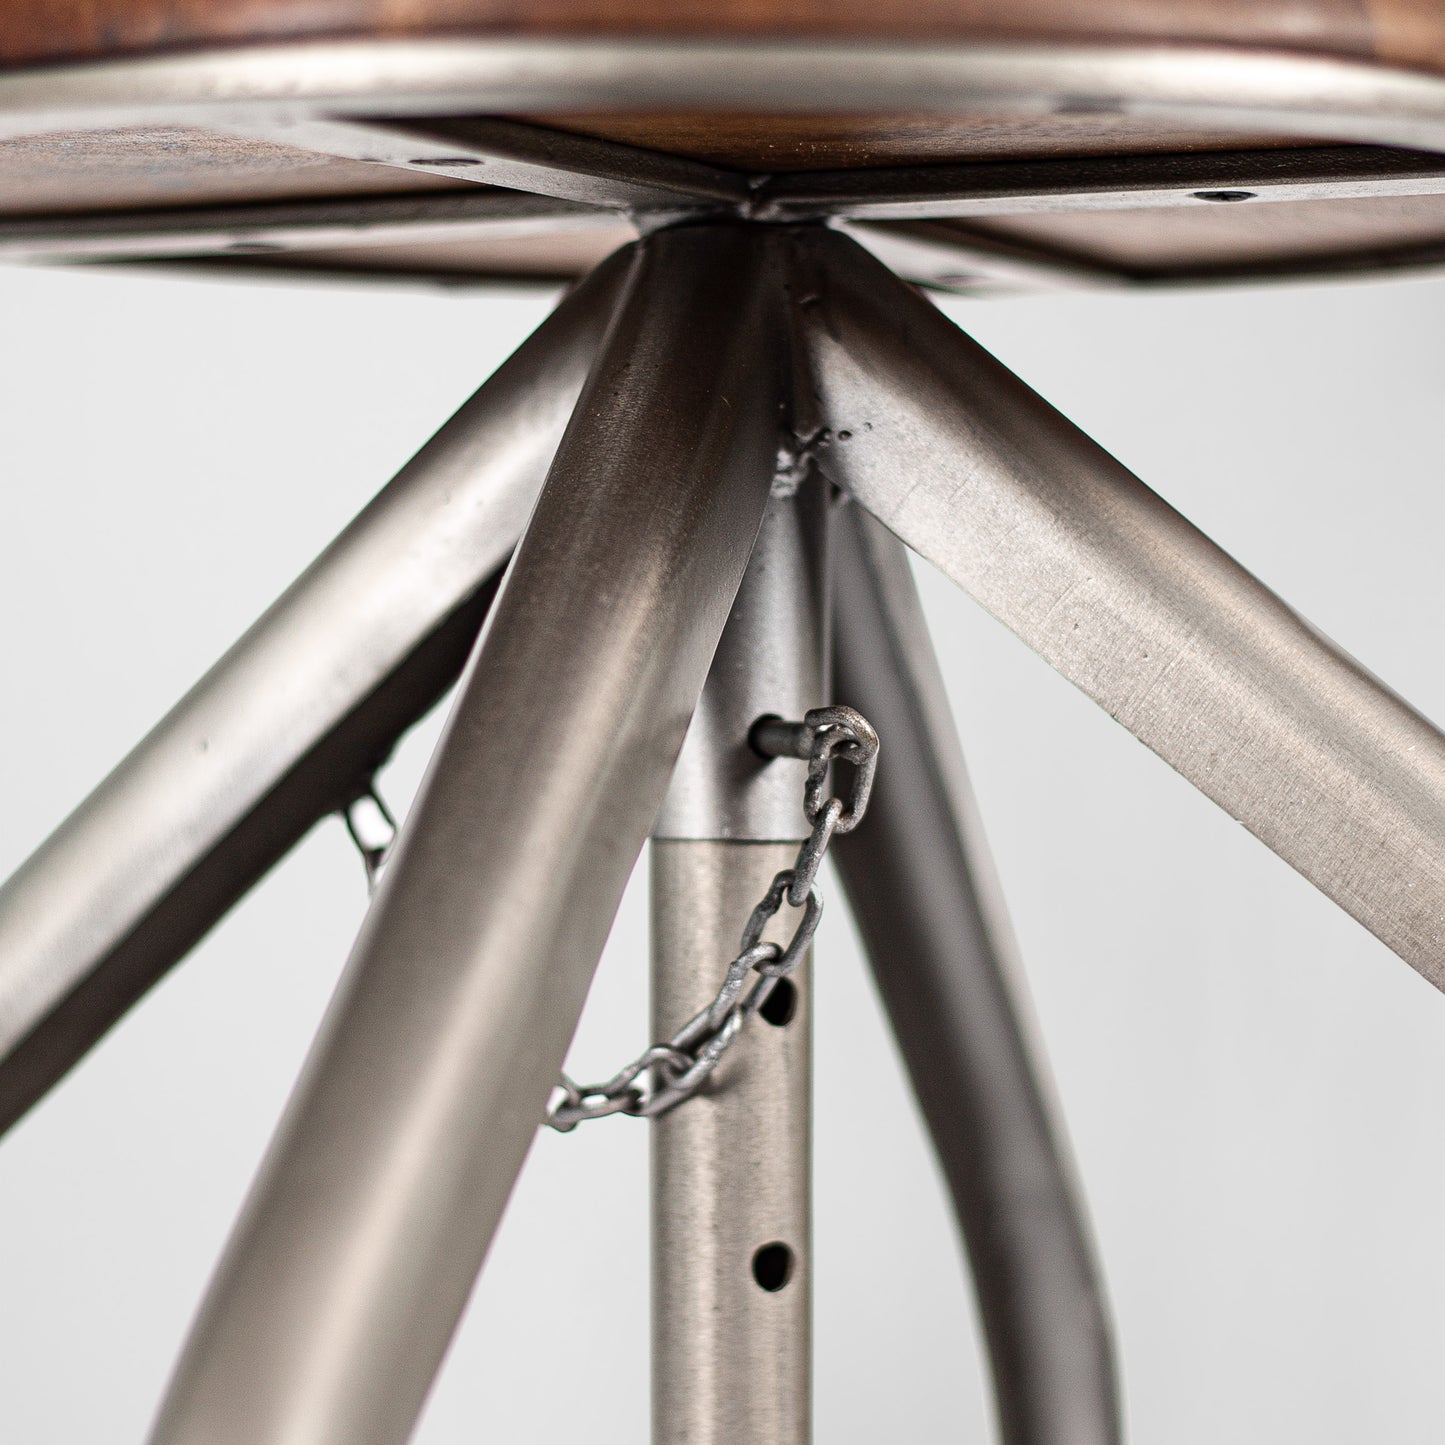 Humphrey Pump – Handmade industrial design stool made of metal with wooden seat in silver